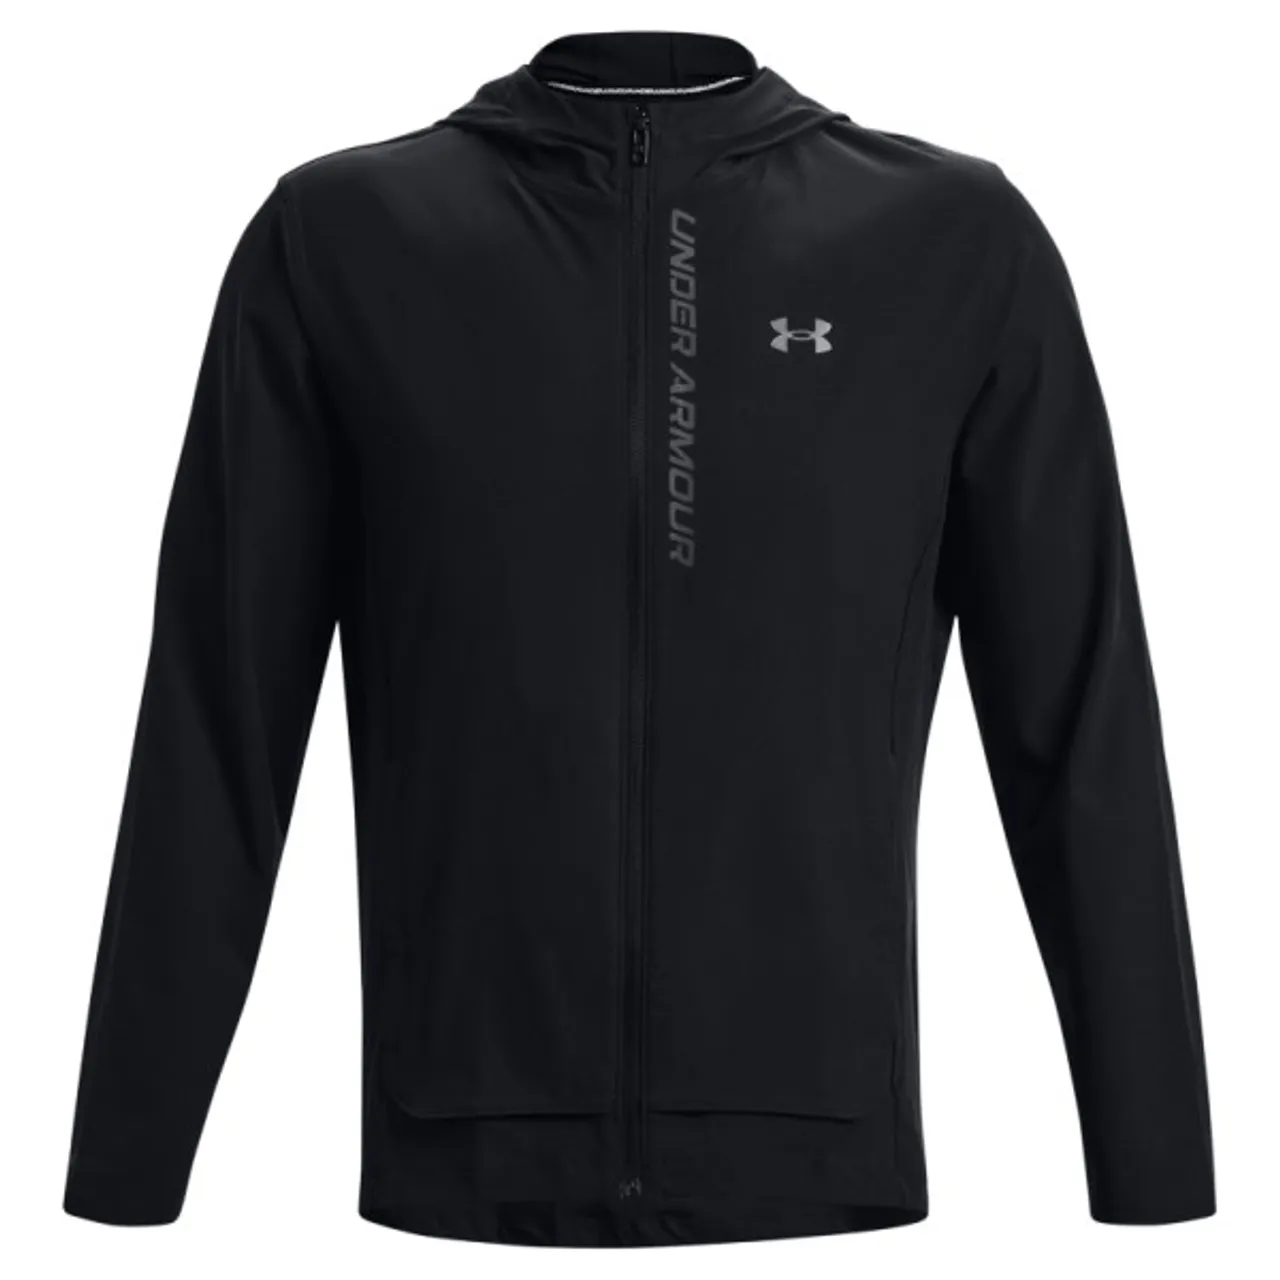 Under Armour - Outrun The Storm Jacket - Running jacket